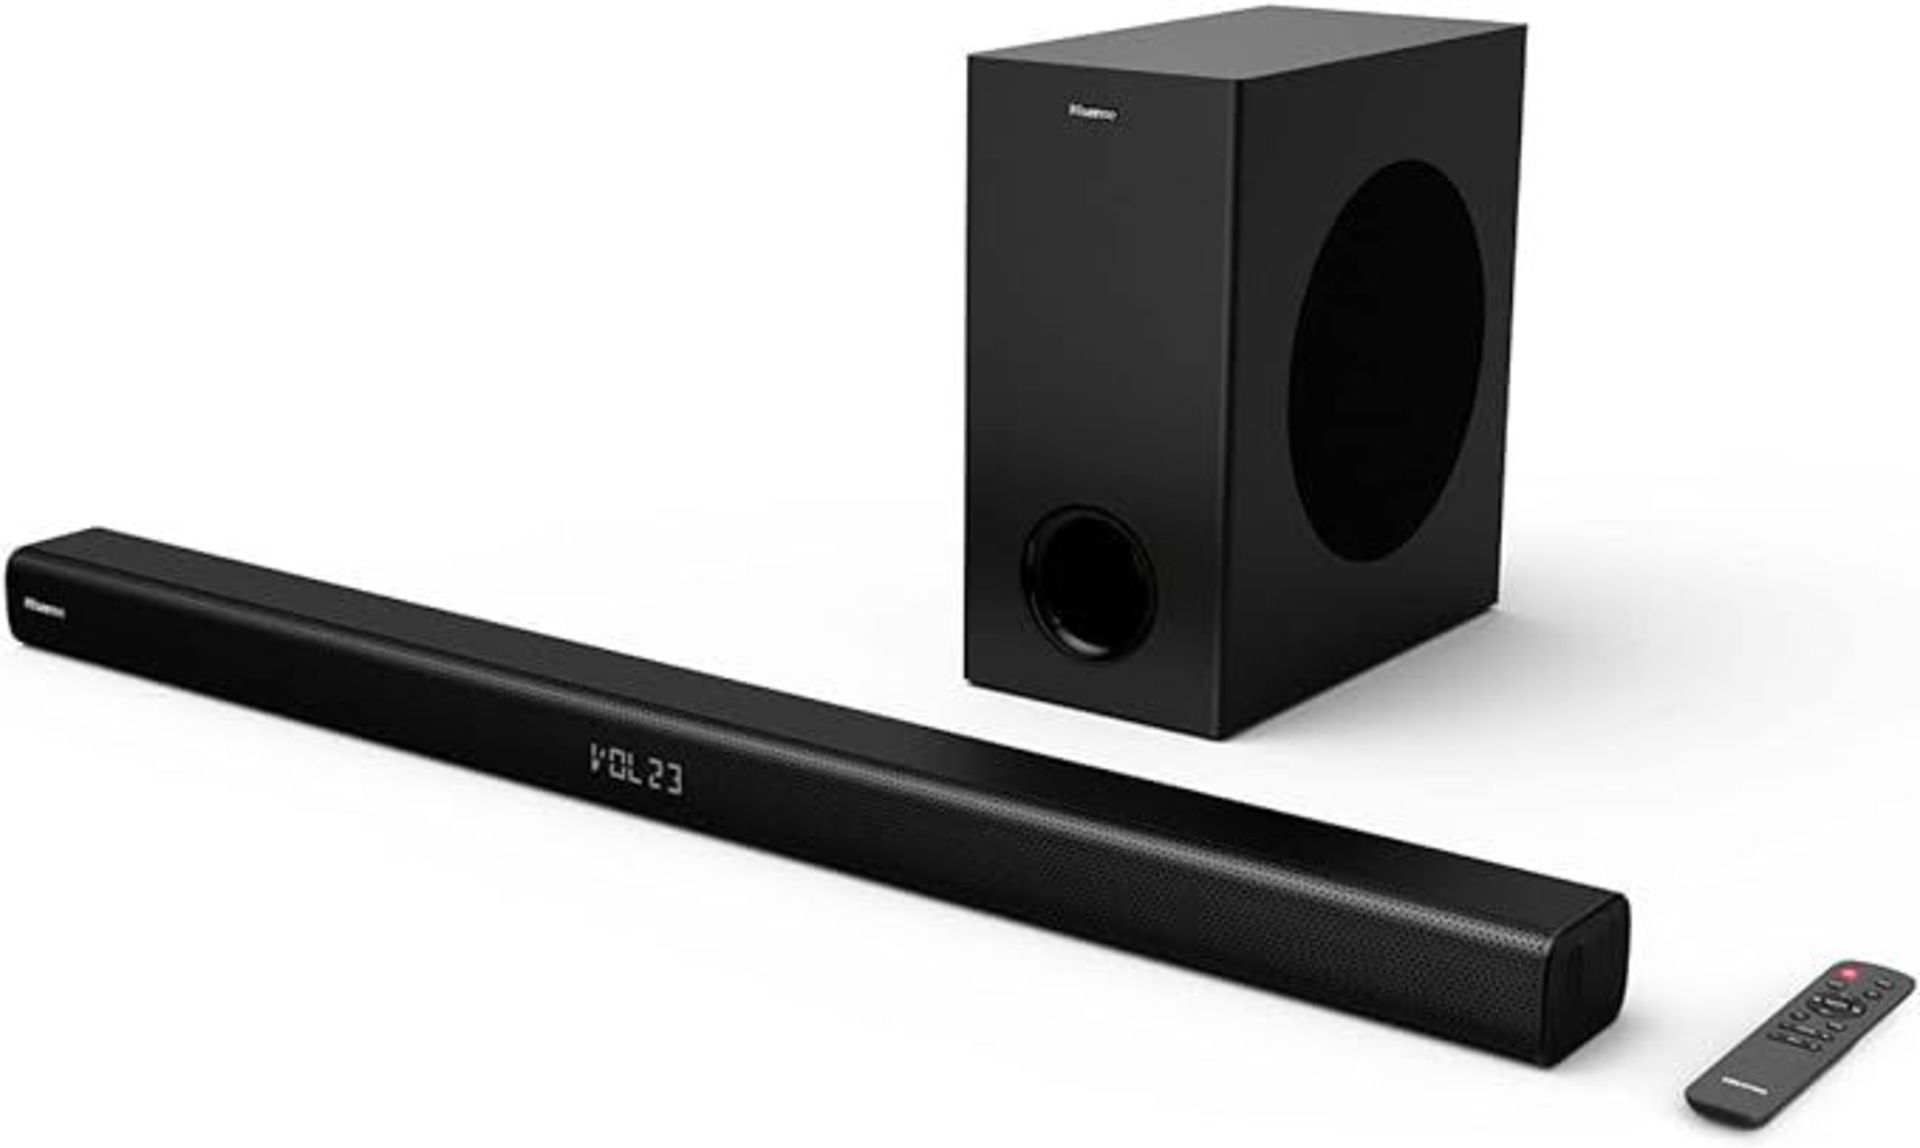 Hisense HS218 2.1ch Sound Bar with Wireless Subwoofer, 200W, Powered by Dolby Audio, Bluetooth, HDMI